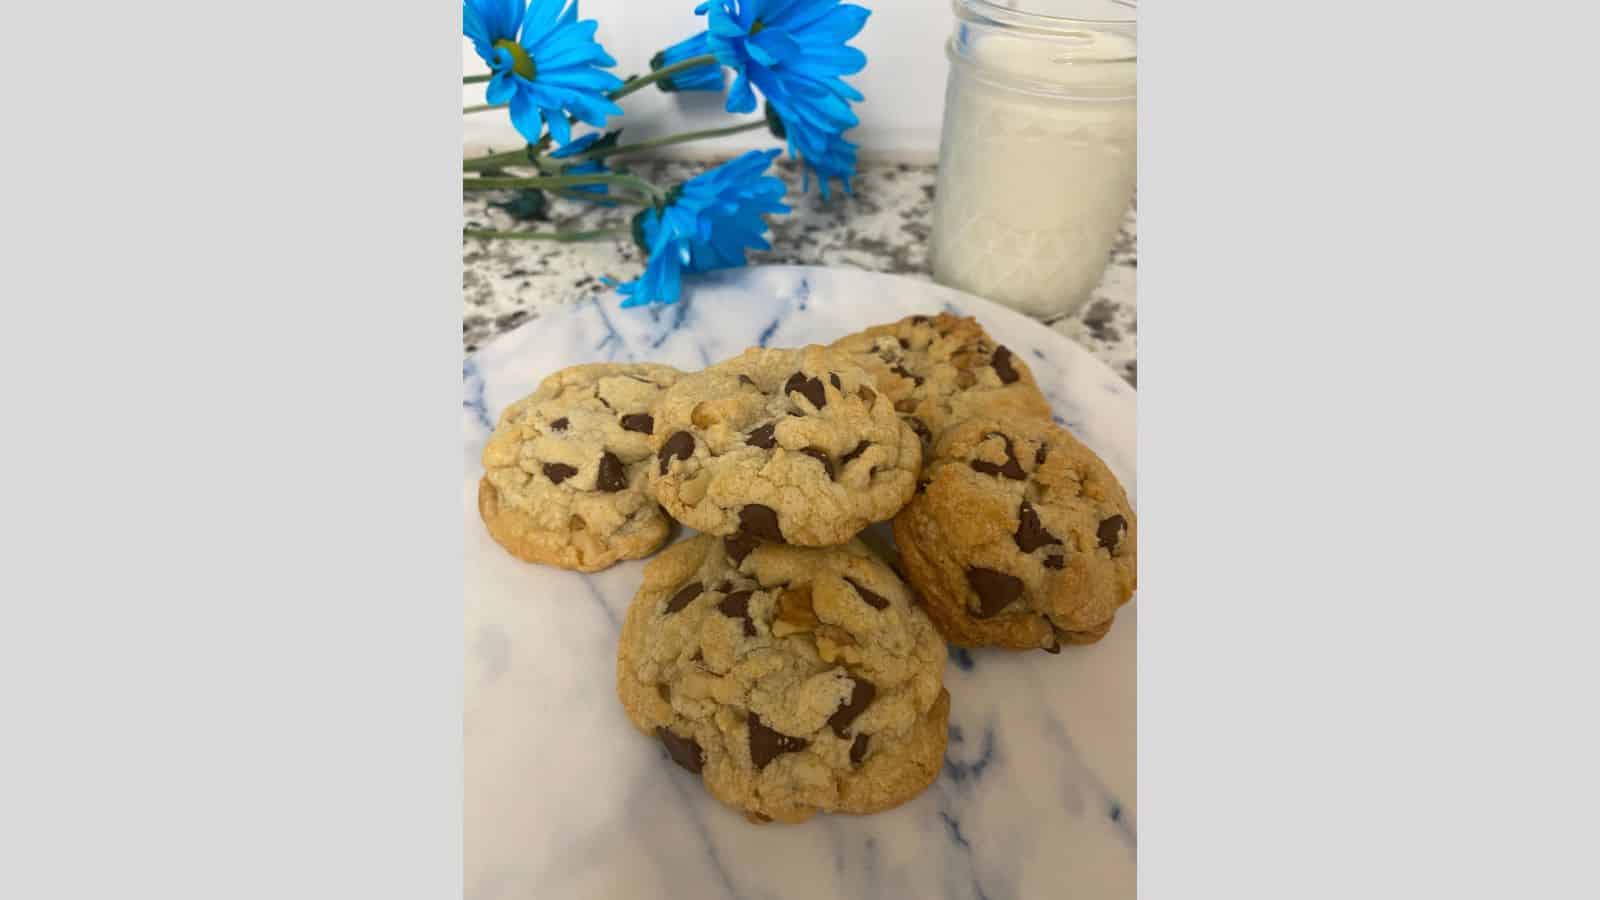 Pile of chocolate chip cookies on marble plate with glass of milk in background.